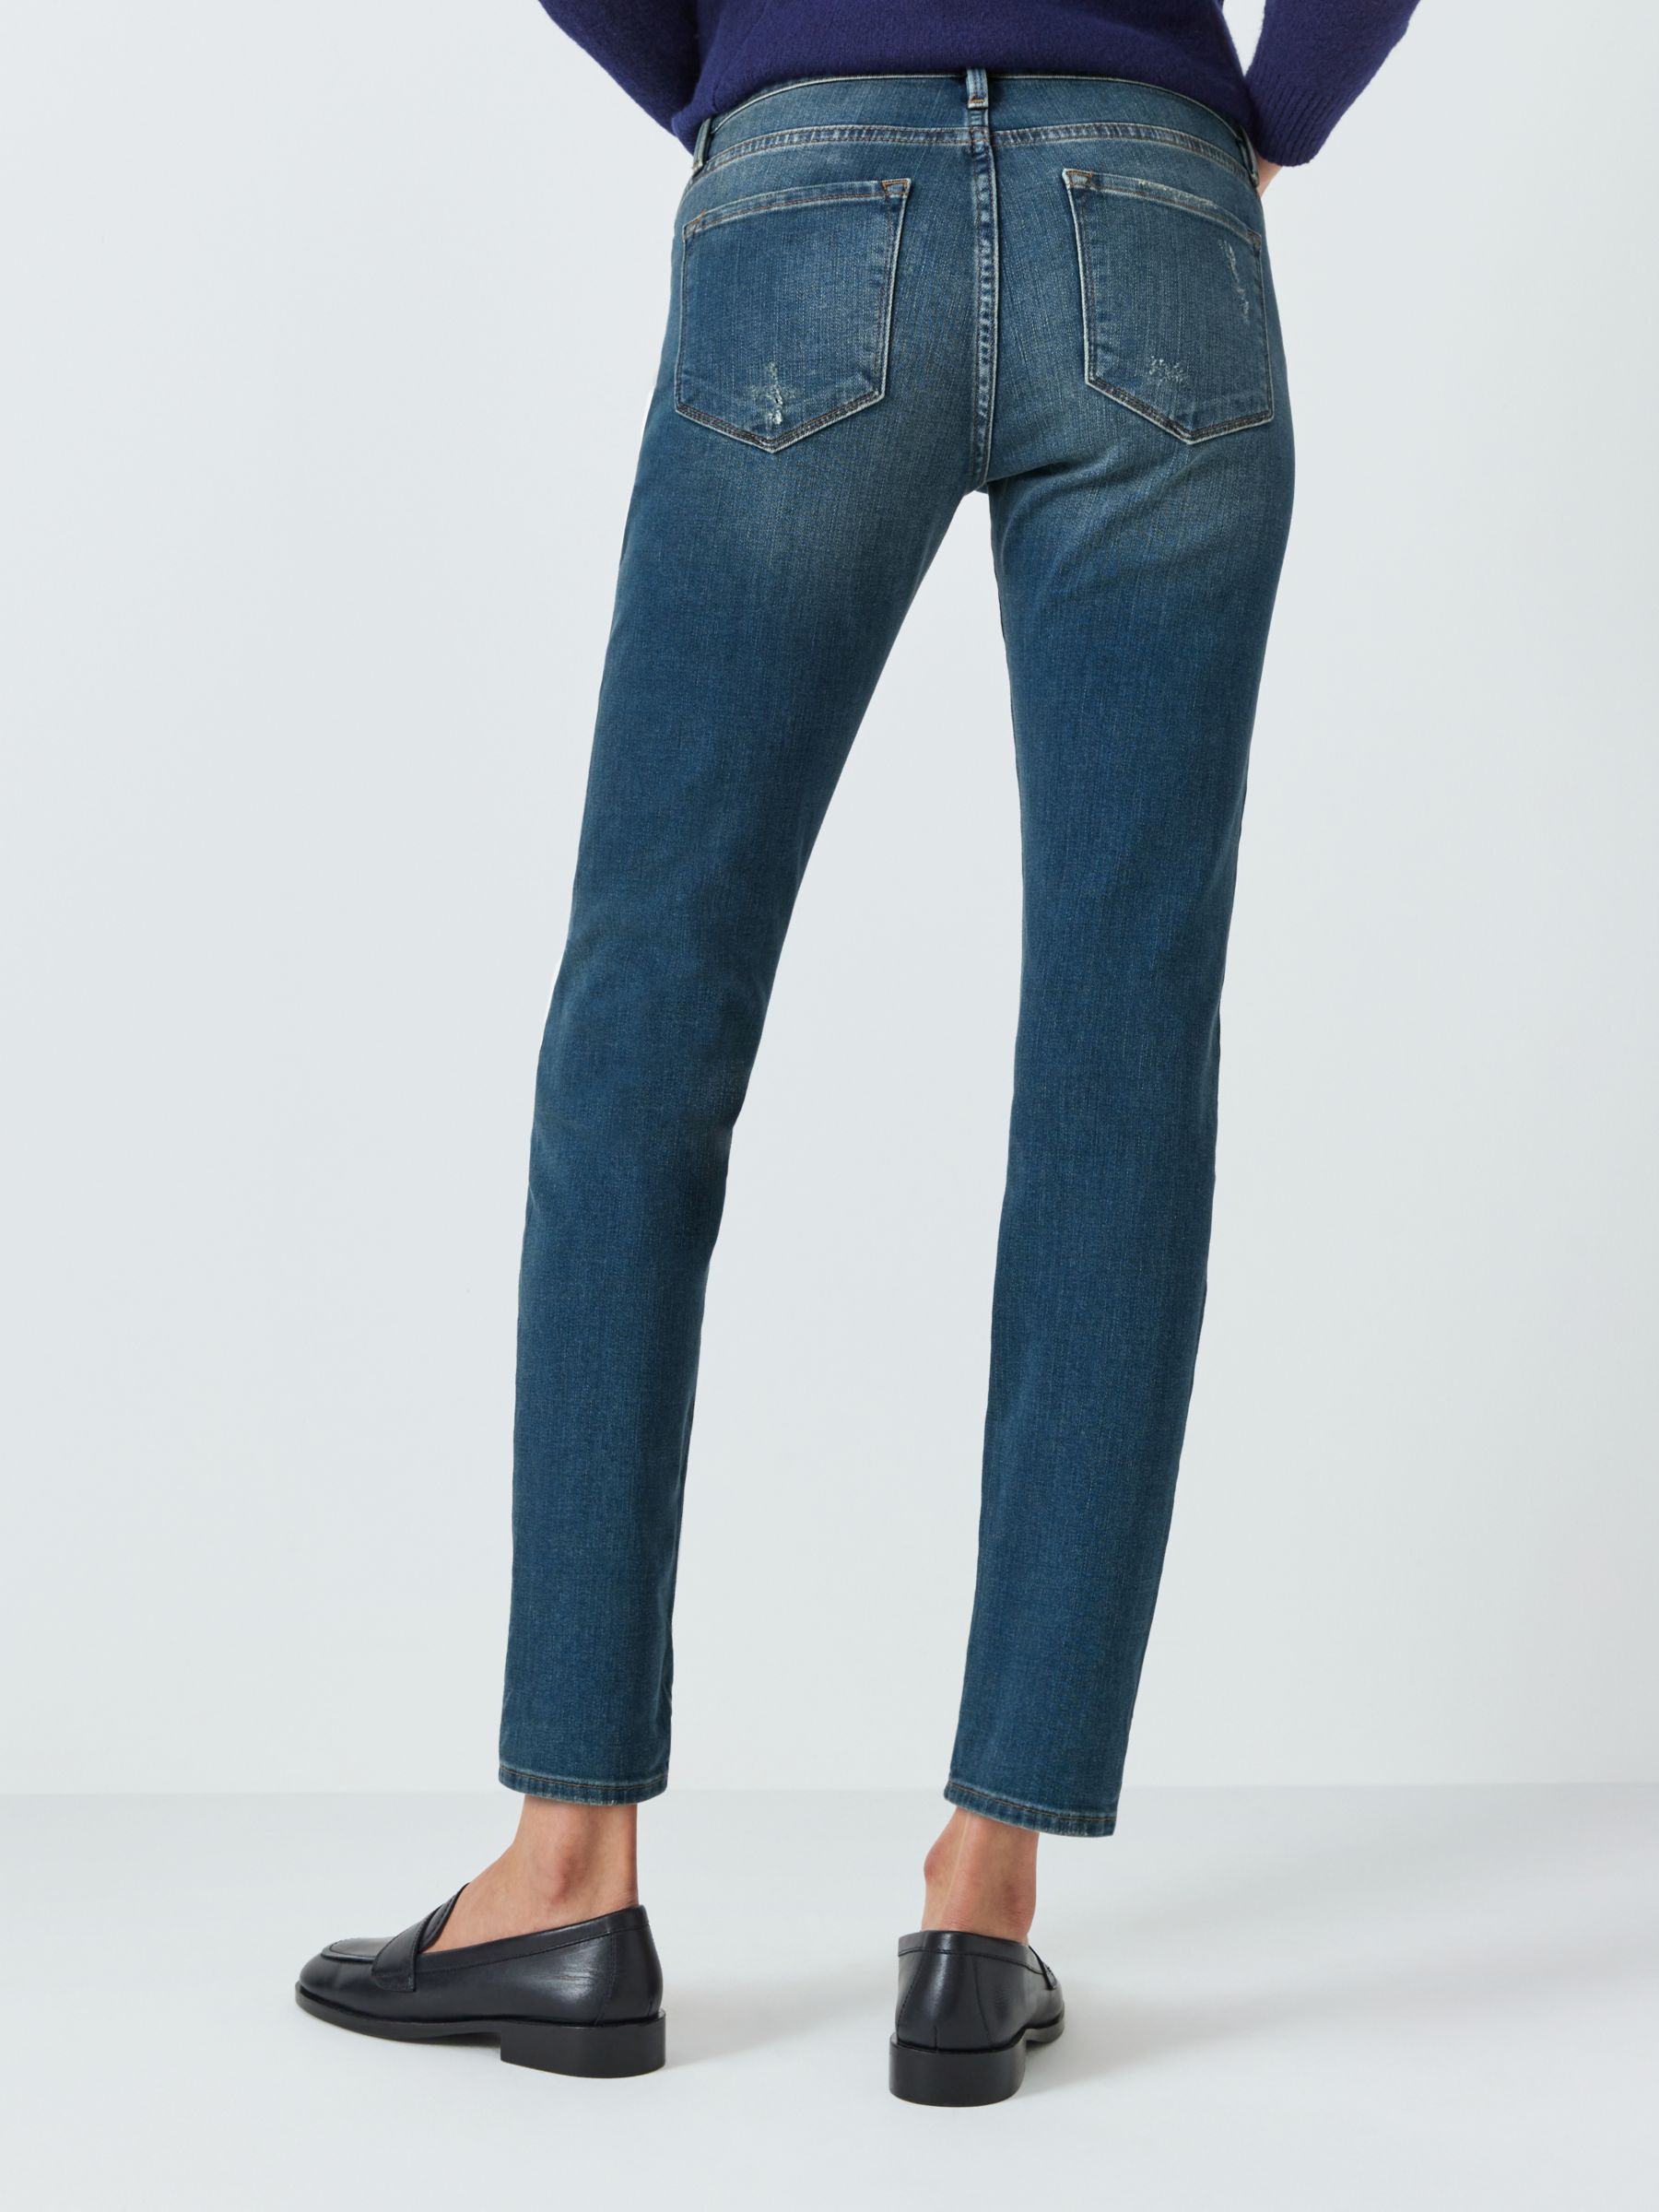 FRAME Le Garcon Mid Rise Slouchy Jeans, Azure, 24